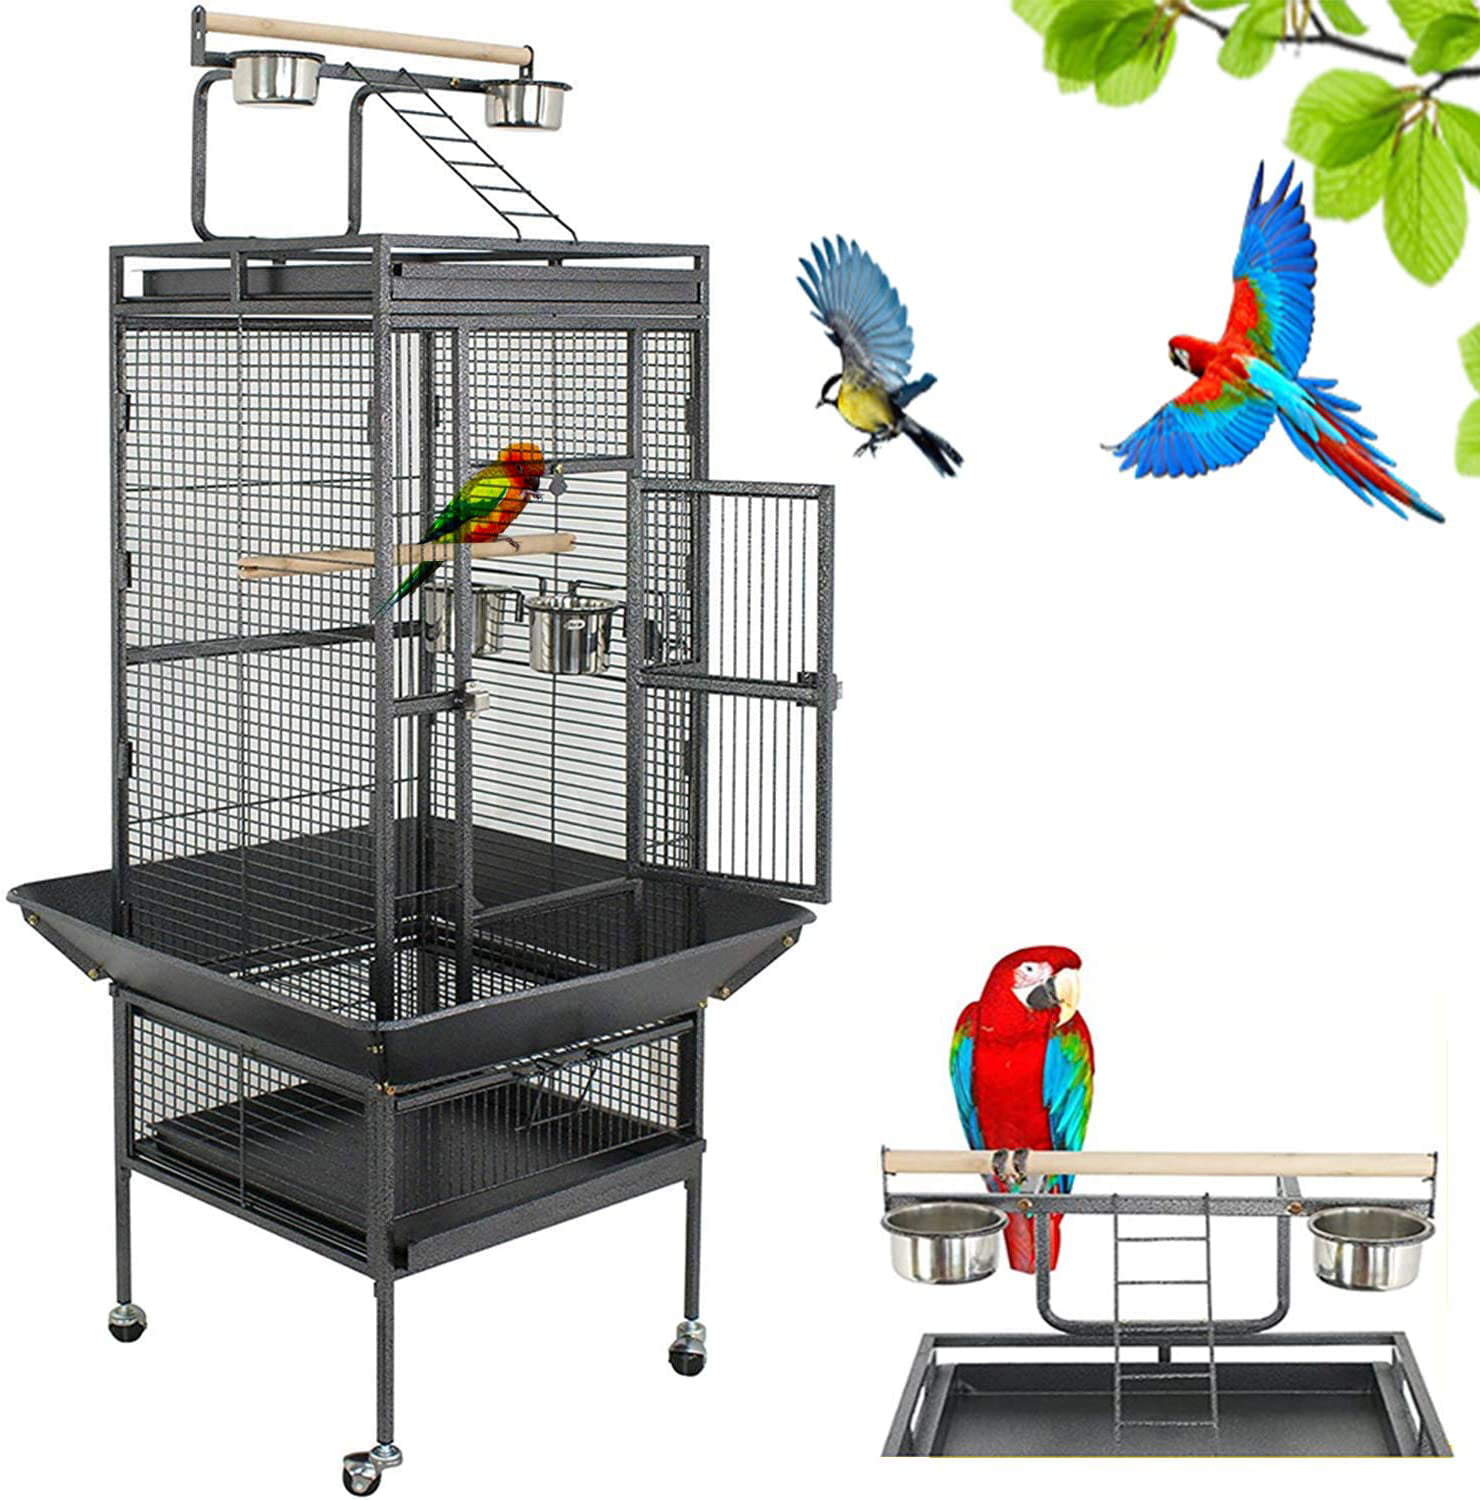 Large 62" Bird Cage Play Top Parrot Perch Stand Feeder Bowl Pet House Lock Wheel 